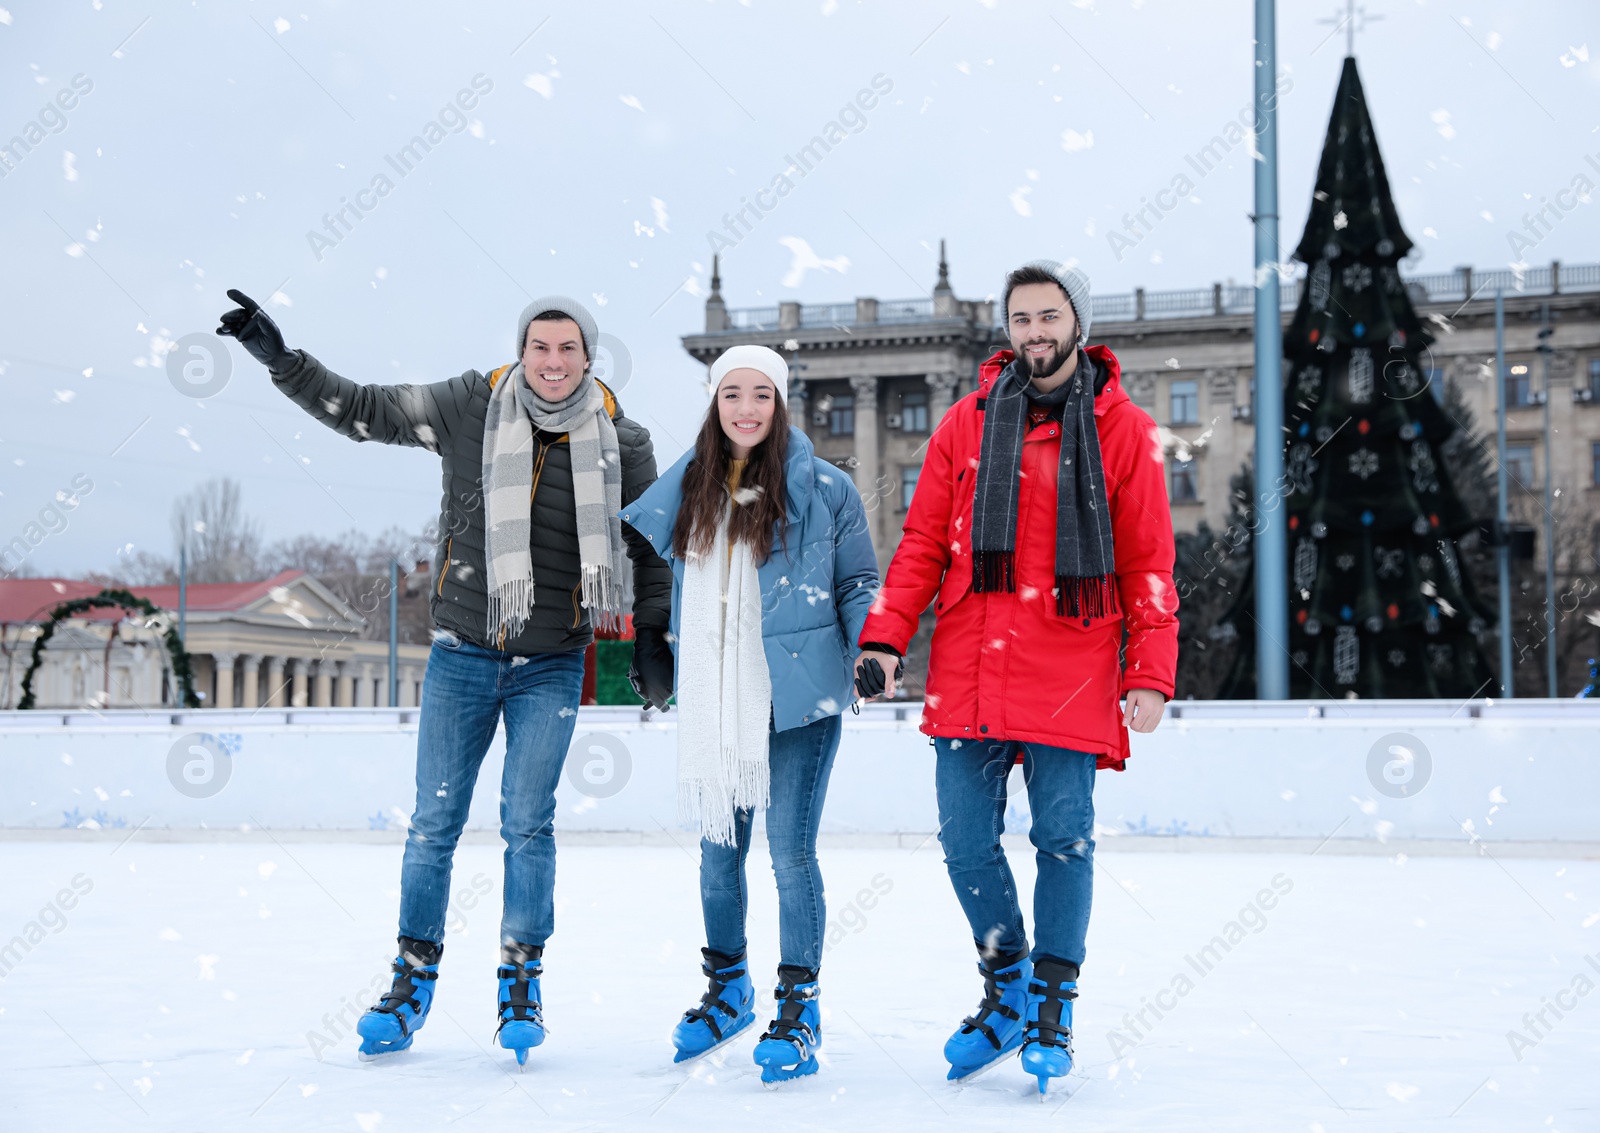 Image of Happy friends skating along ice rink outdoors